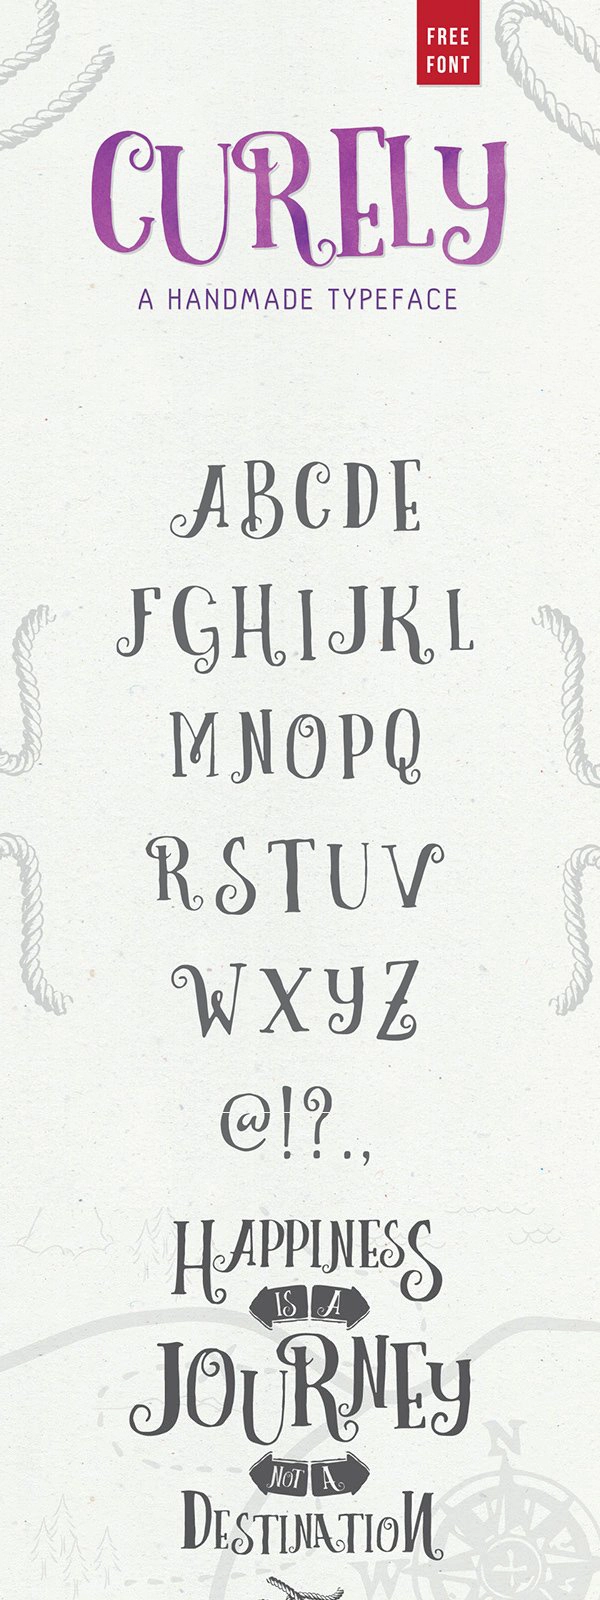 Curely Free Typeface